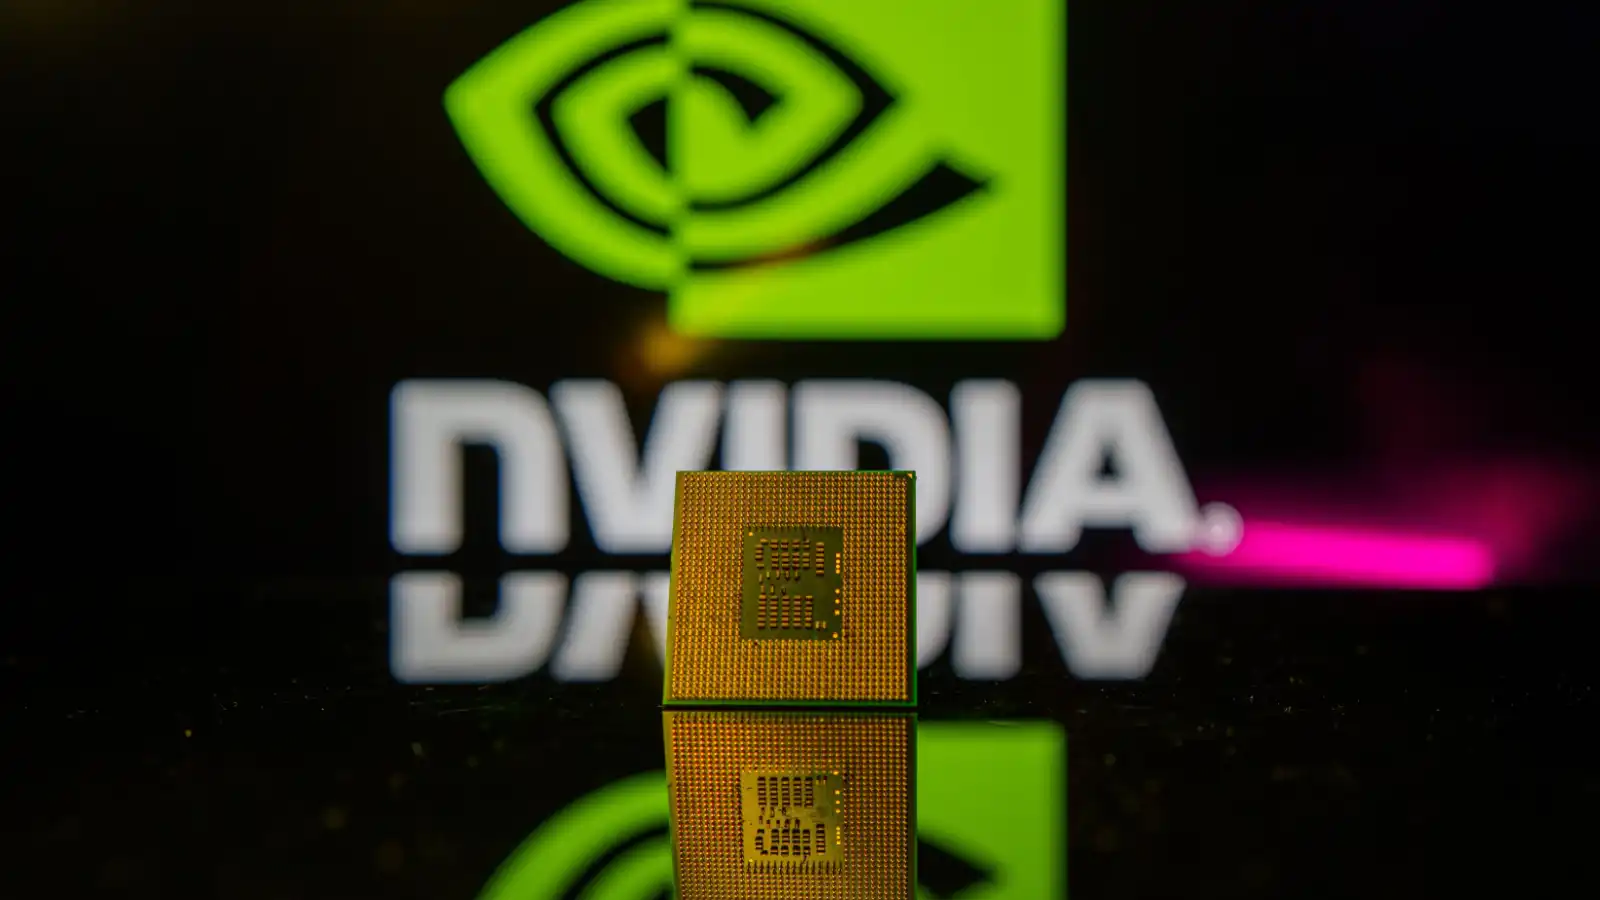 NVDA Stock: Amazon Denies Reports of Halted Orders Nvidia Superchips